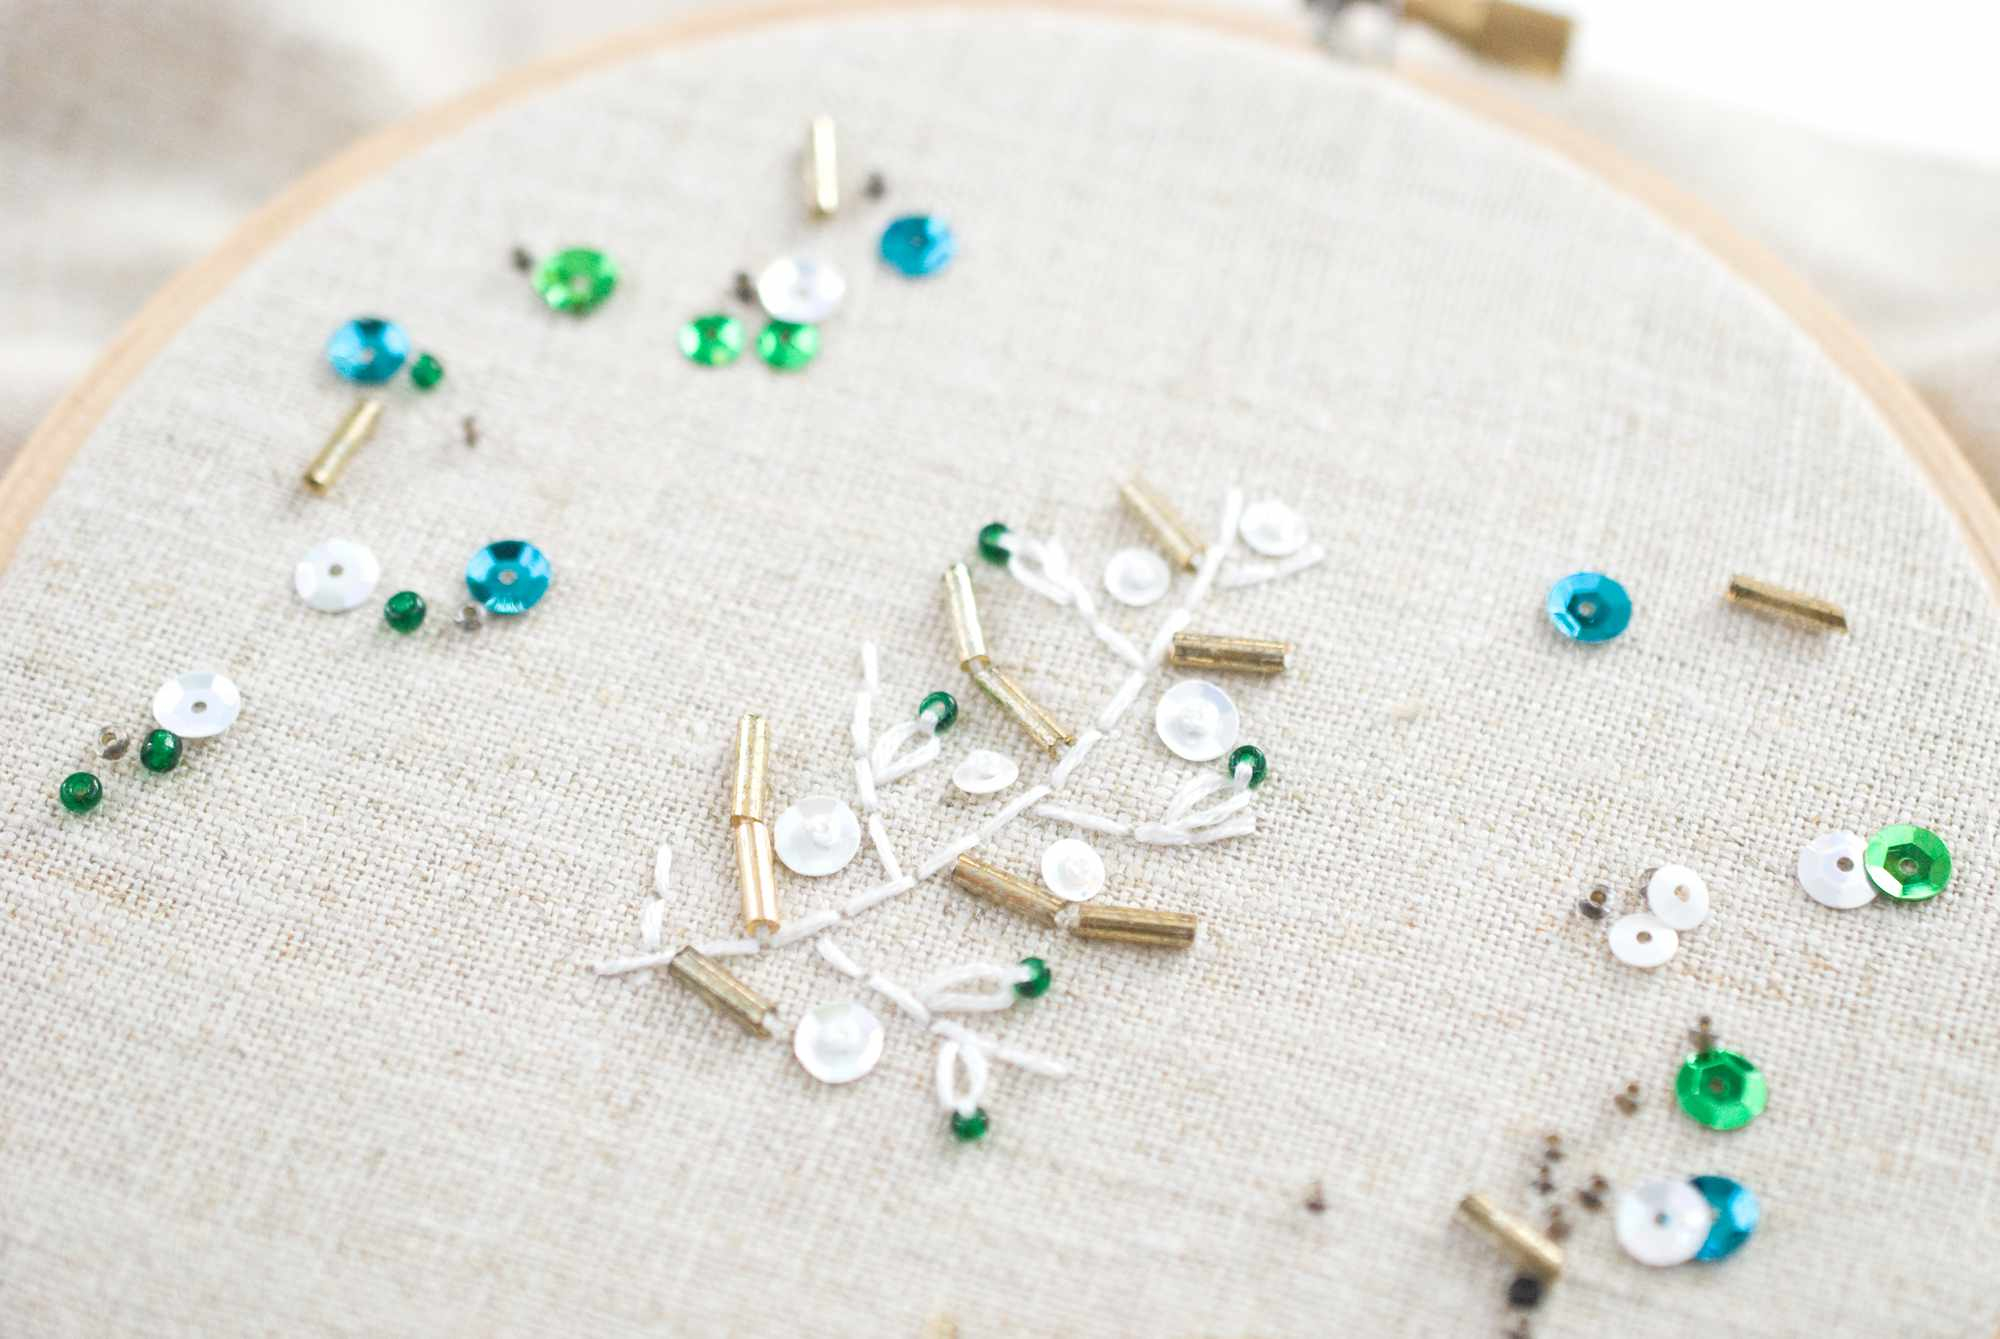 Sequin Embroidery Patterns Make Your Stitching Sparkle With Beads And Sequins